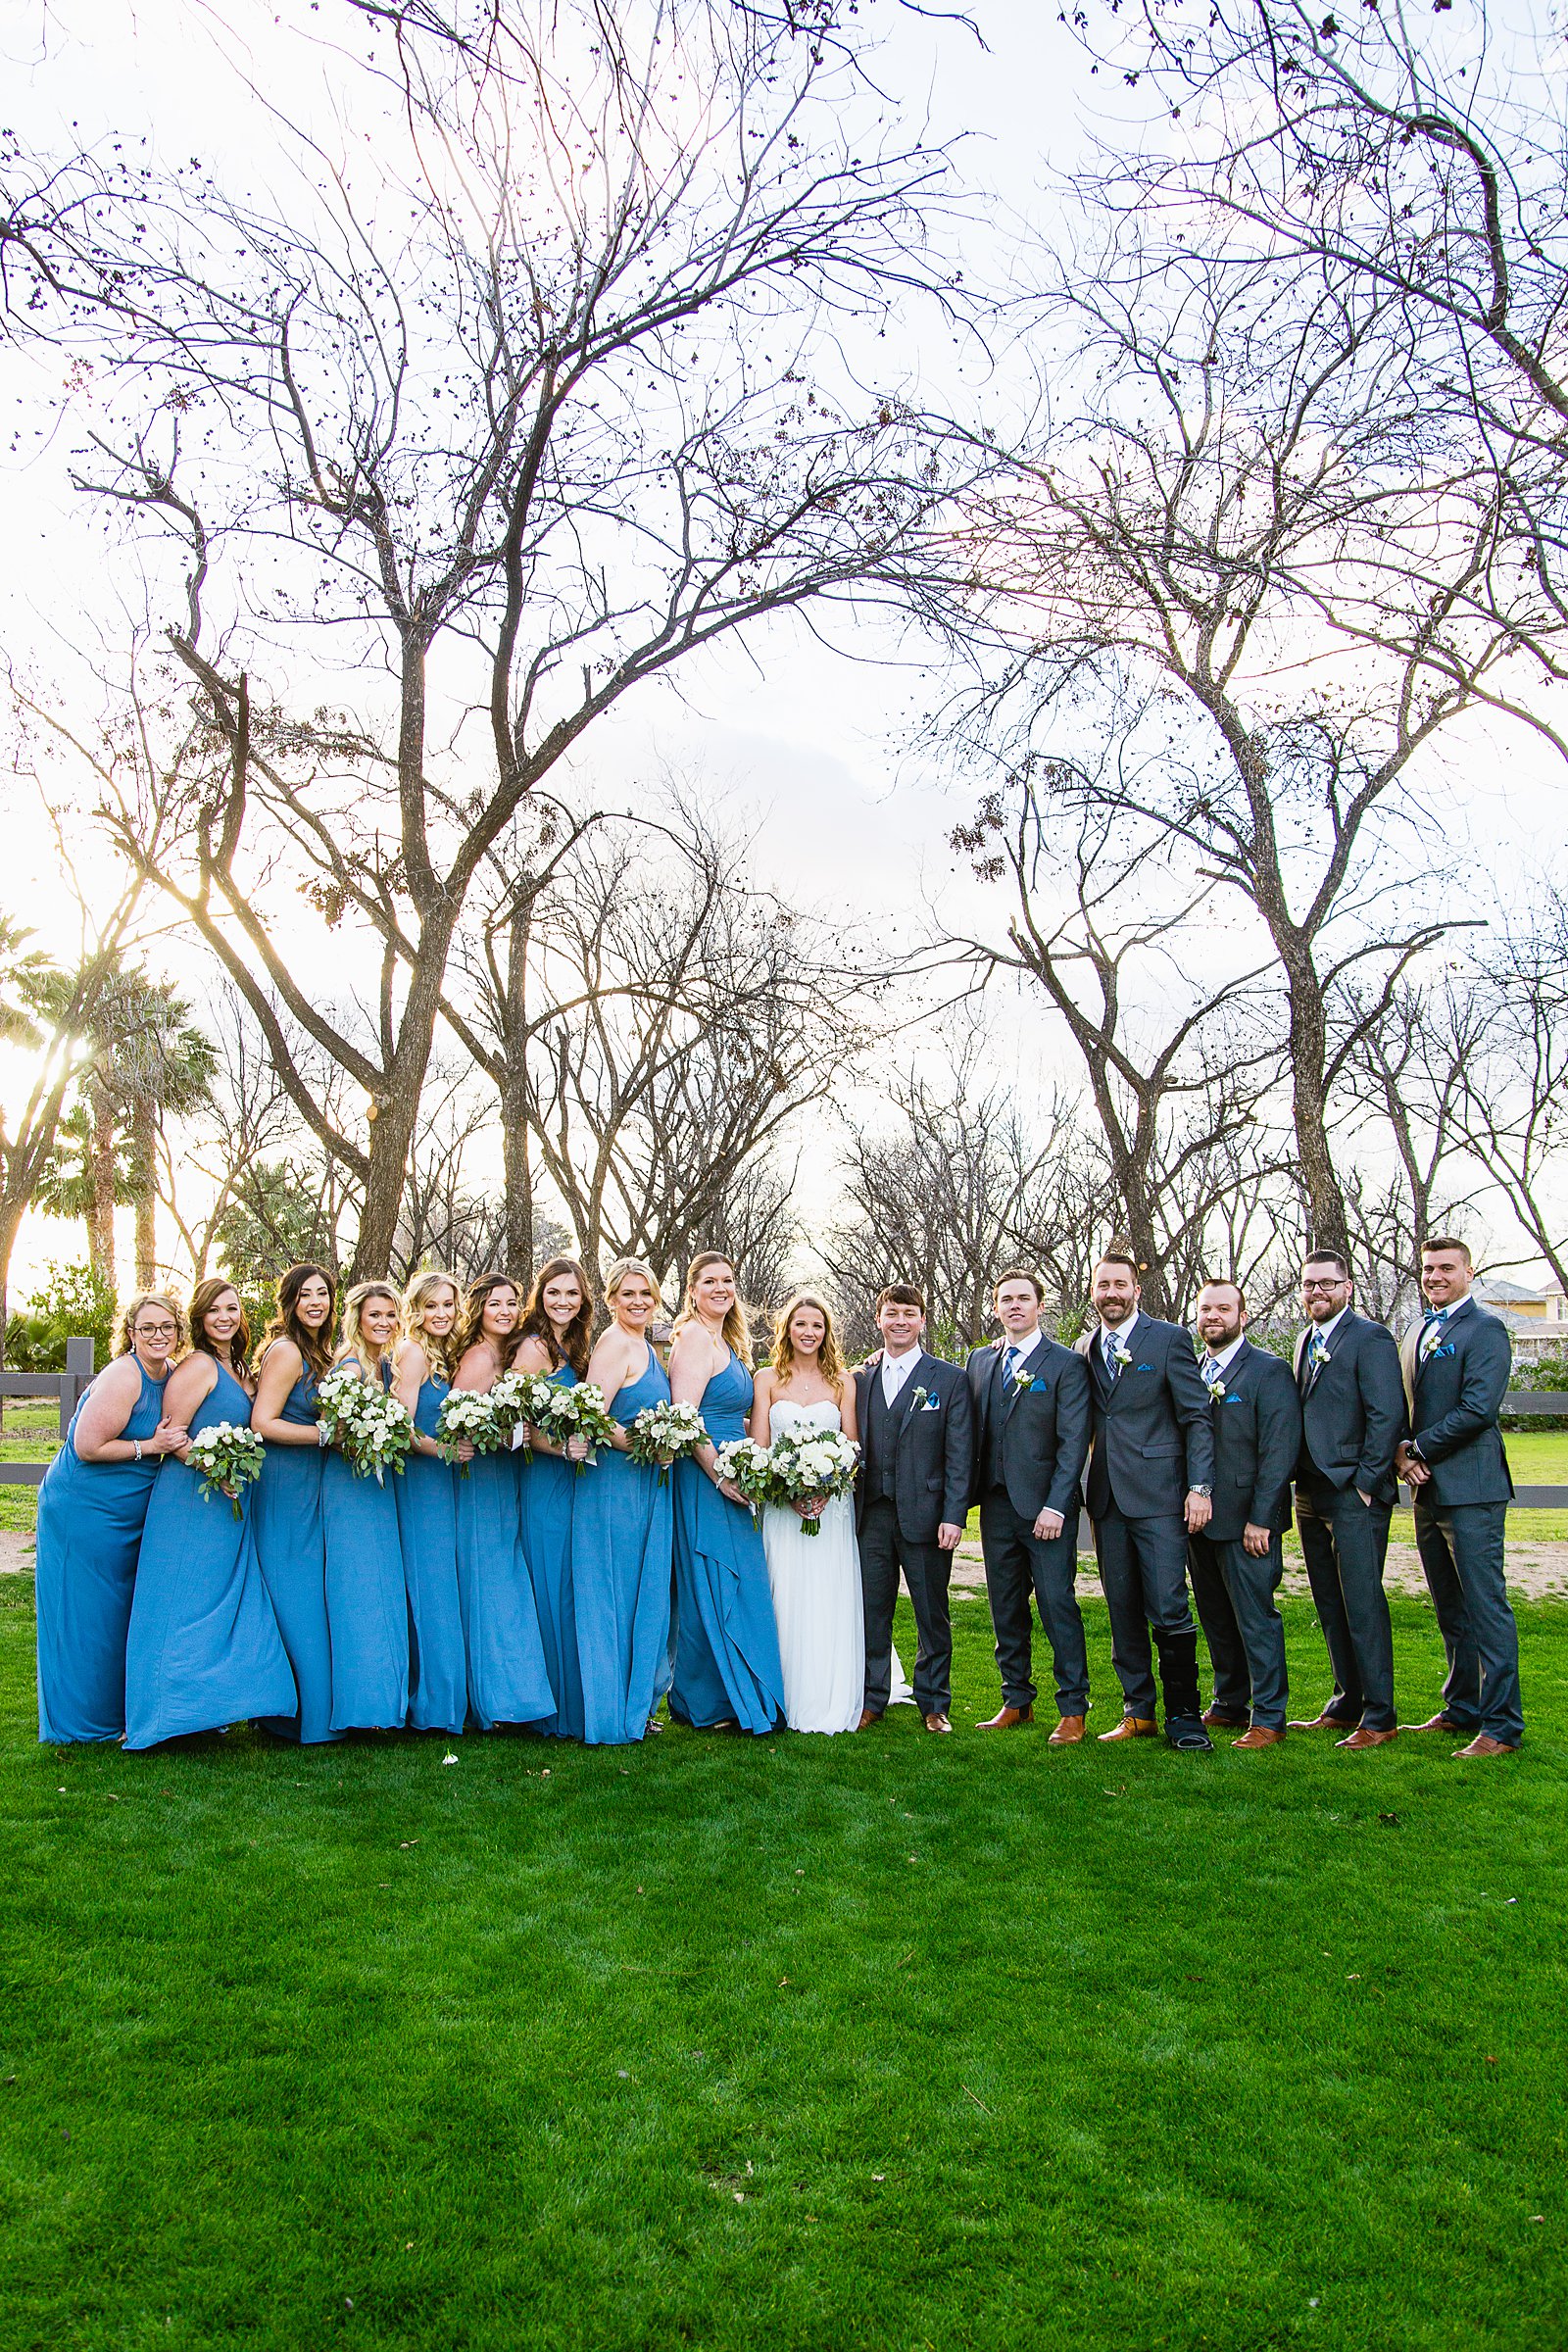 Bridal party together at a Venue At The Grove wedding by Arizona wedding photographer PMA Photography.